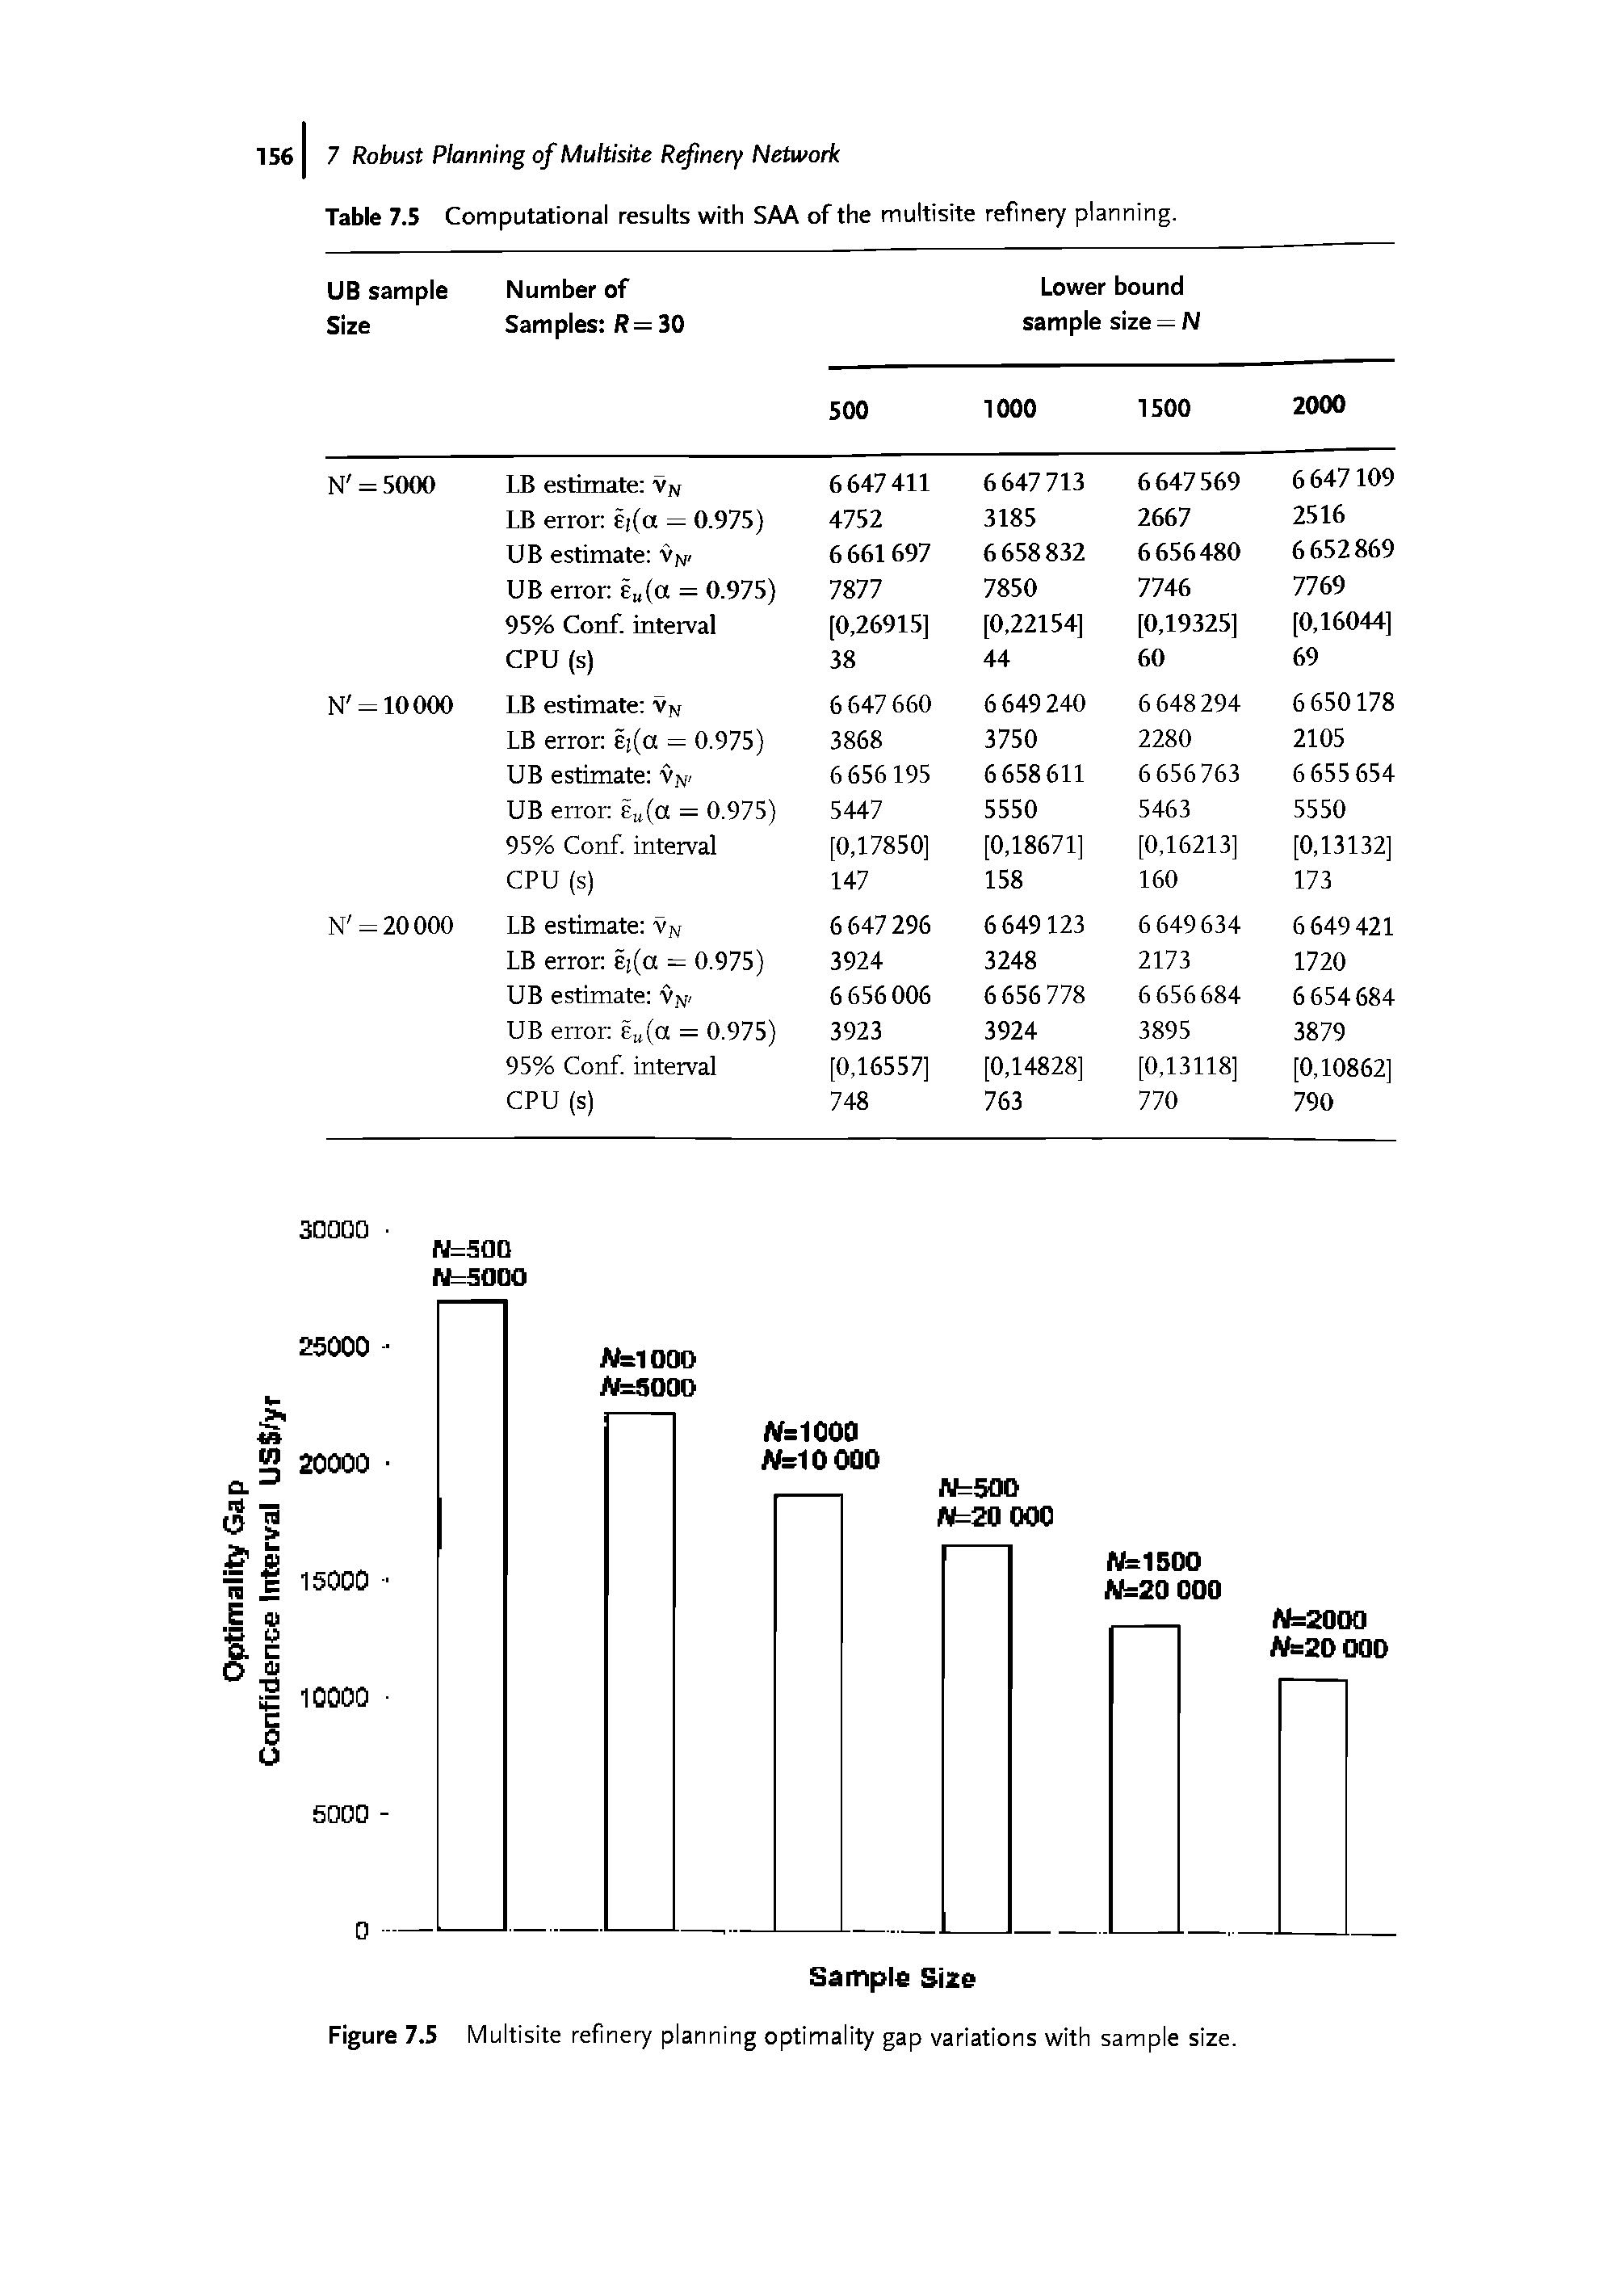 Table 7.5 Computational results with SAA of the multisite refinery planning.